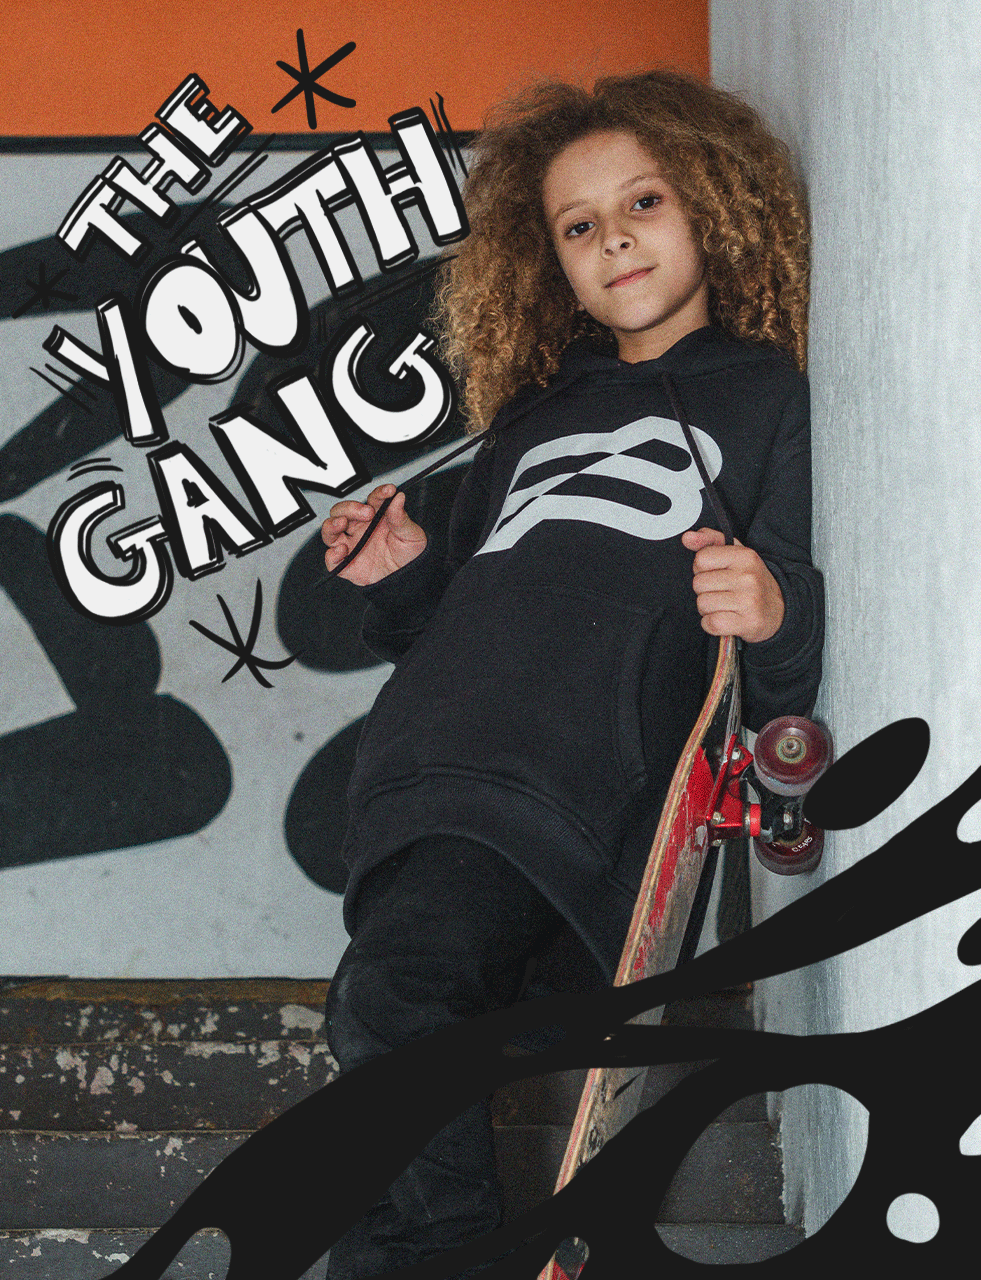 The Youth Gang Drop